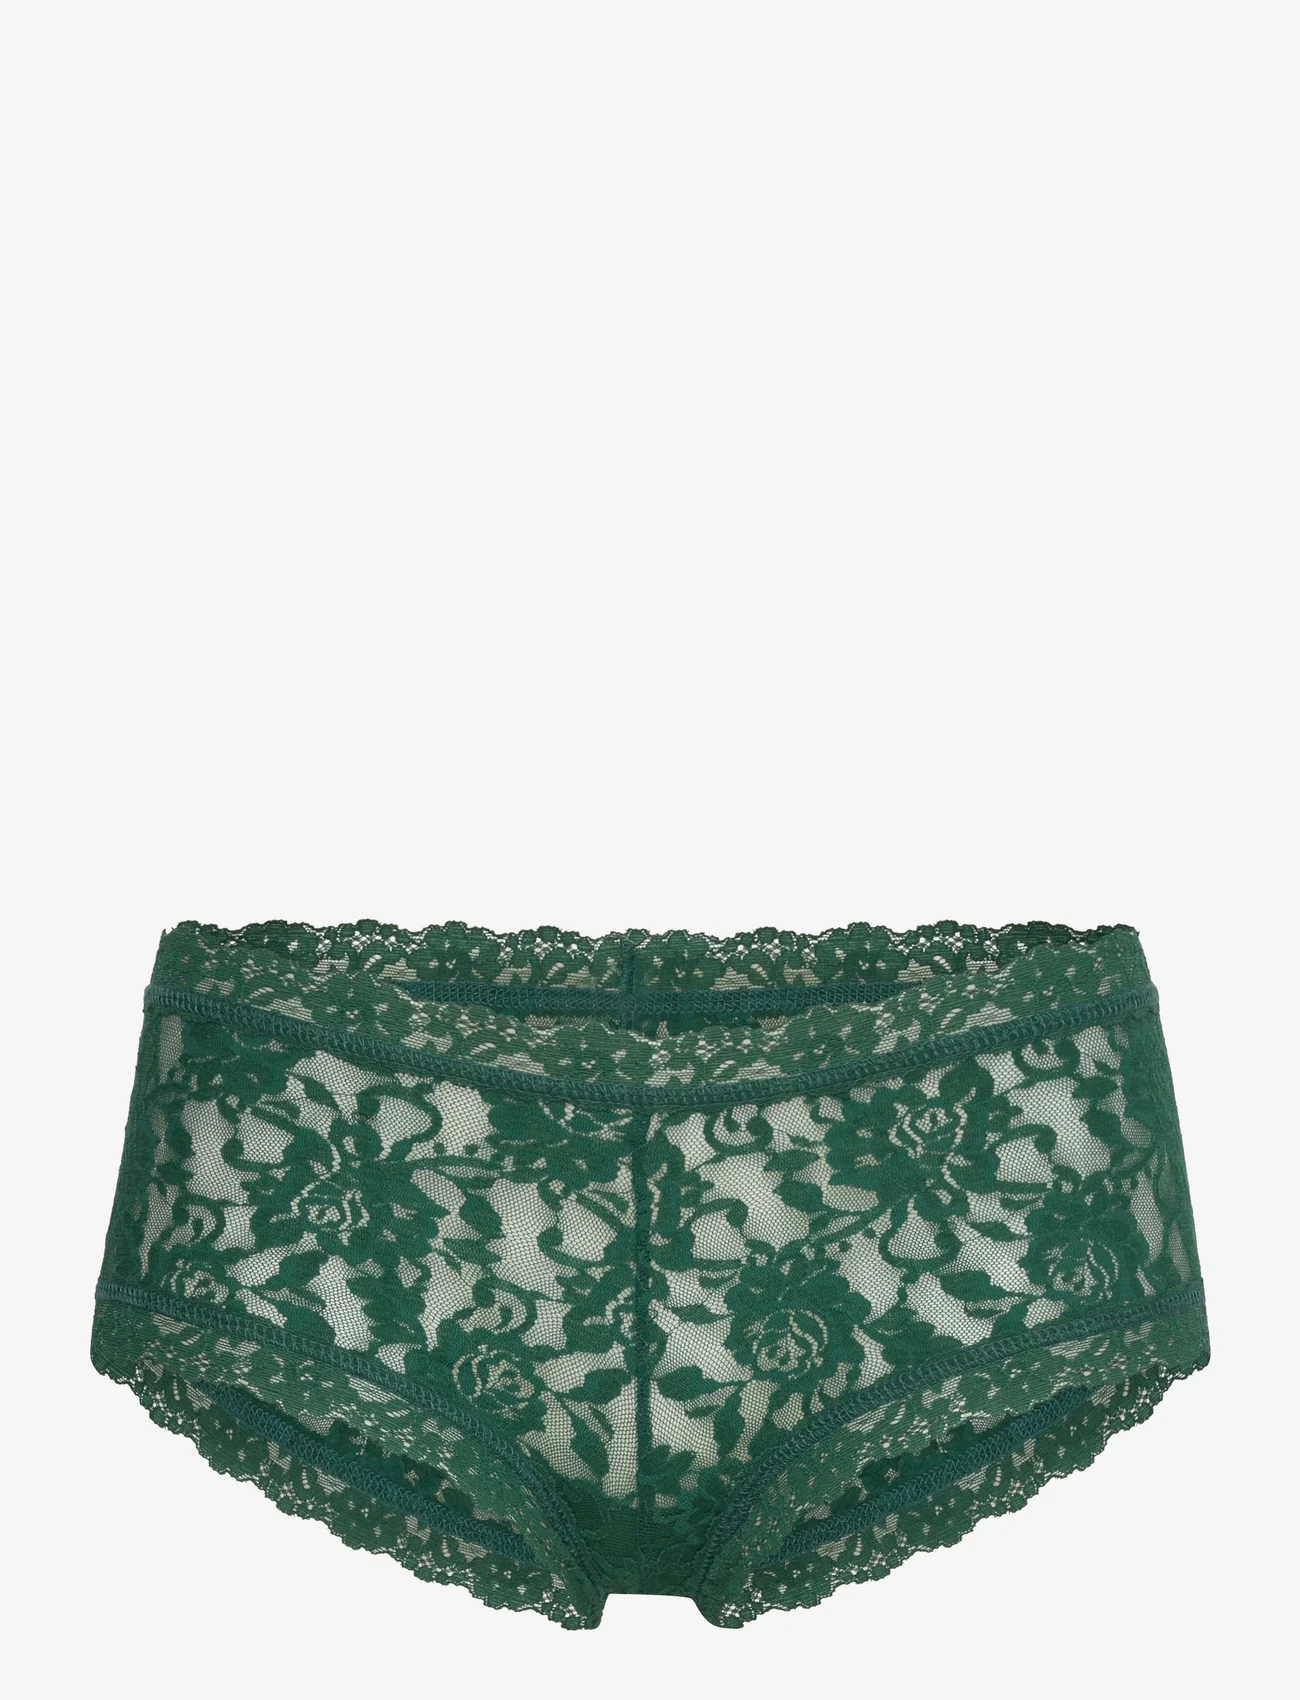 Hanky Panky - Hanky Panky Signature Lace - hipsters & boyshorts - green queen - 0